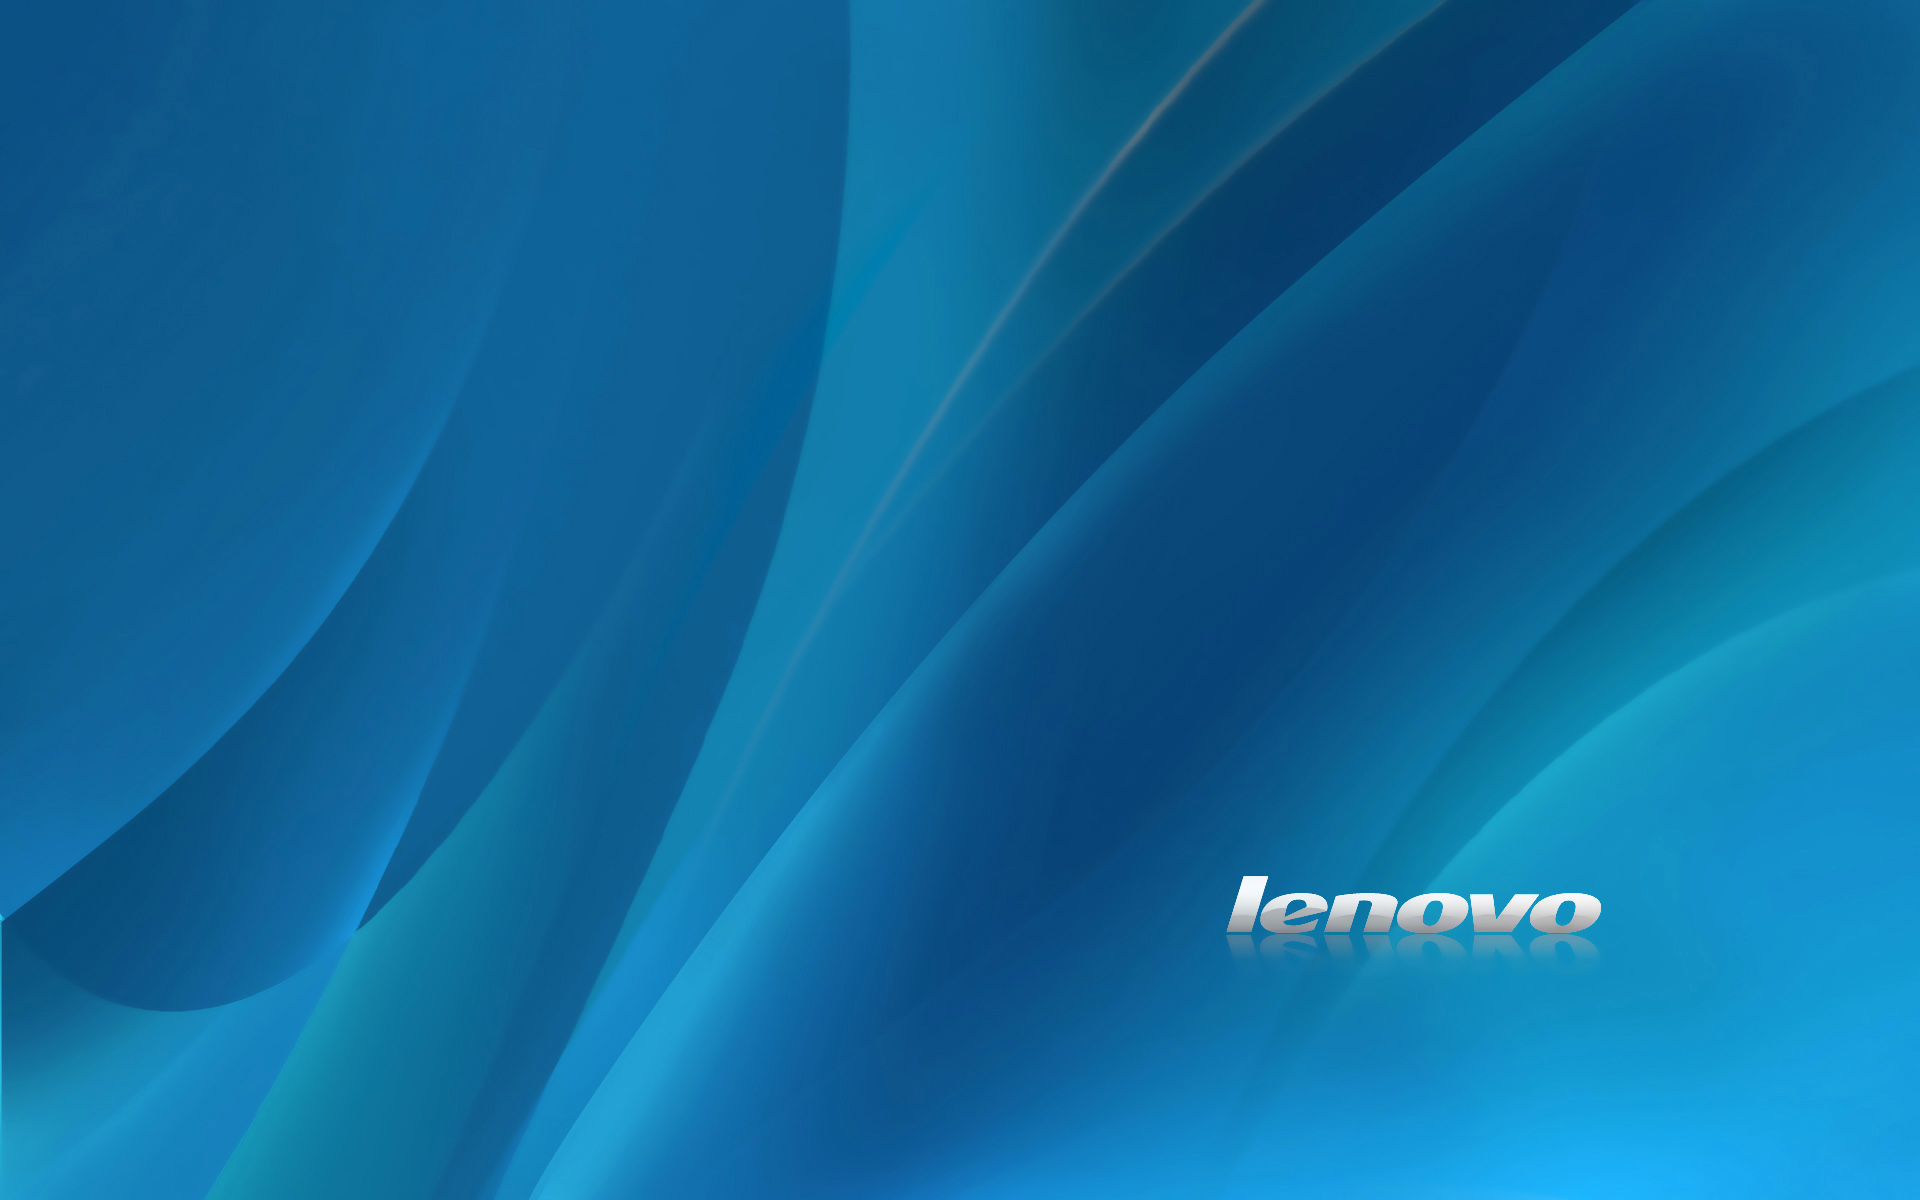 Lenovo Wallpapers | Full HD Pictures